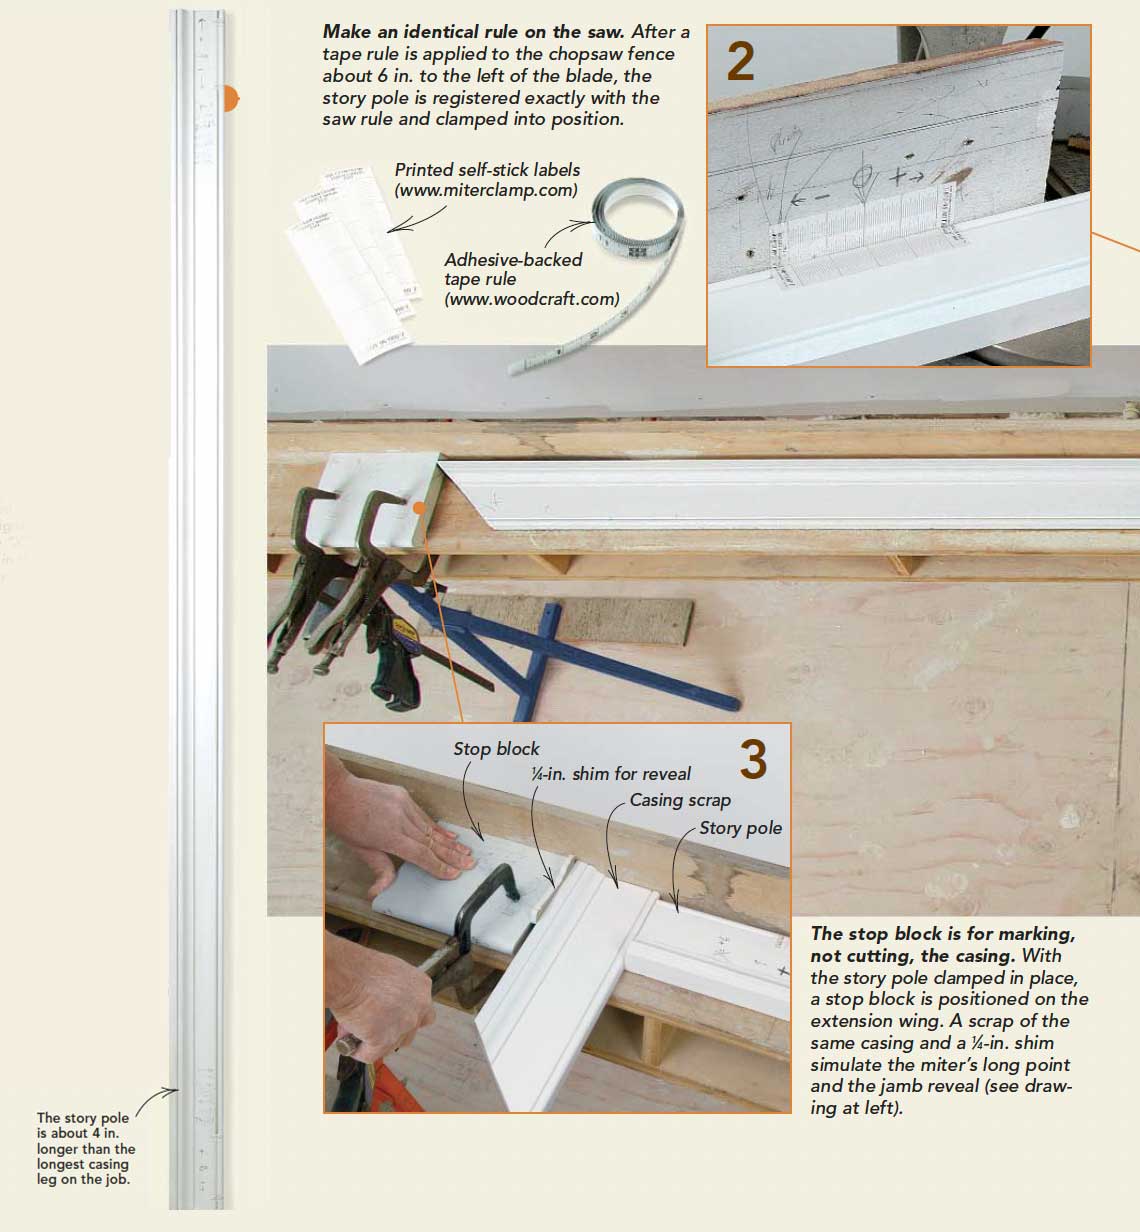 Make an identical rule on the saw. After a tape rule is applied to the chopsaw fence about 6 in. to the left of the blade, the story pole is registered exactly with the saw rule and clamped into position.